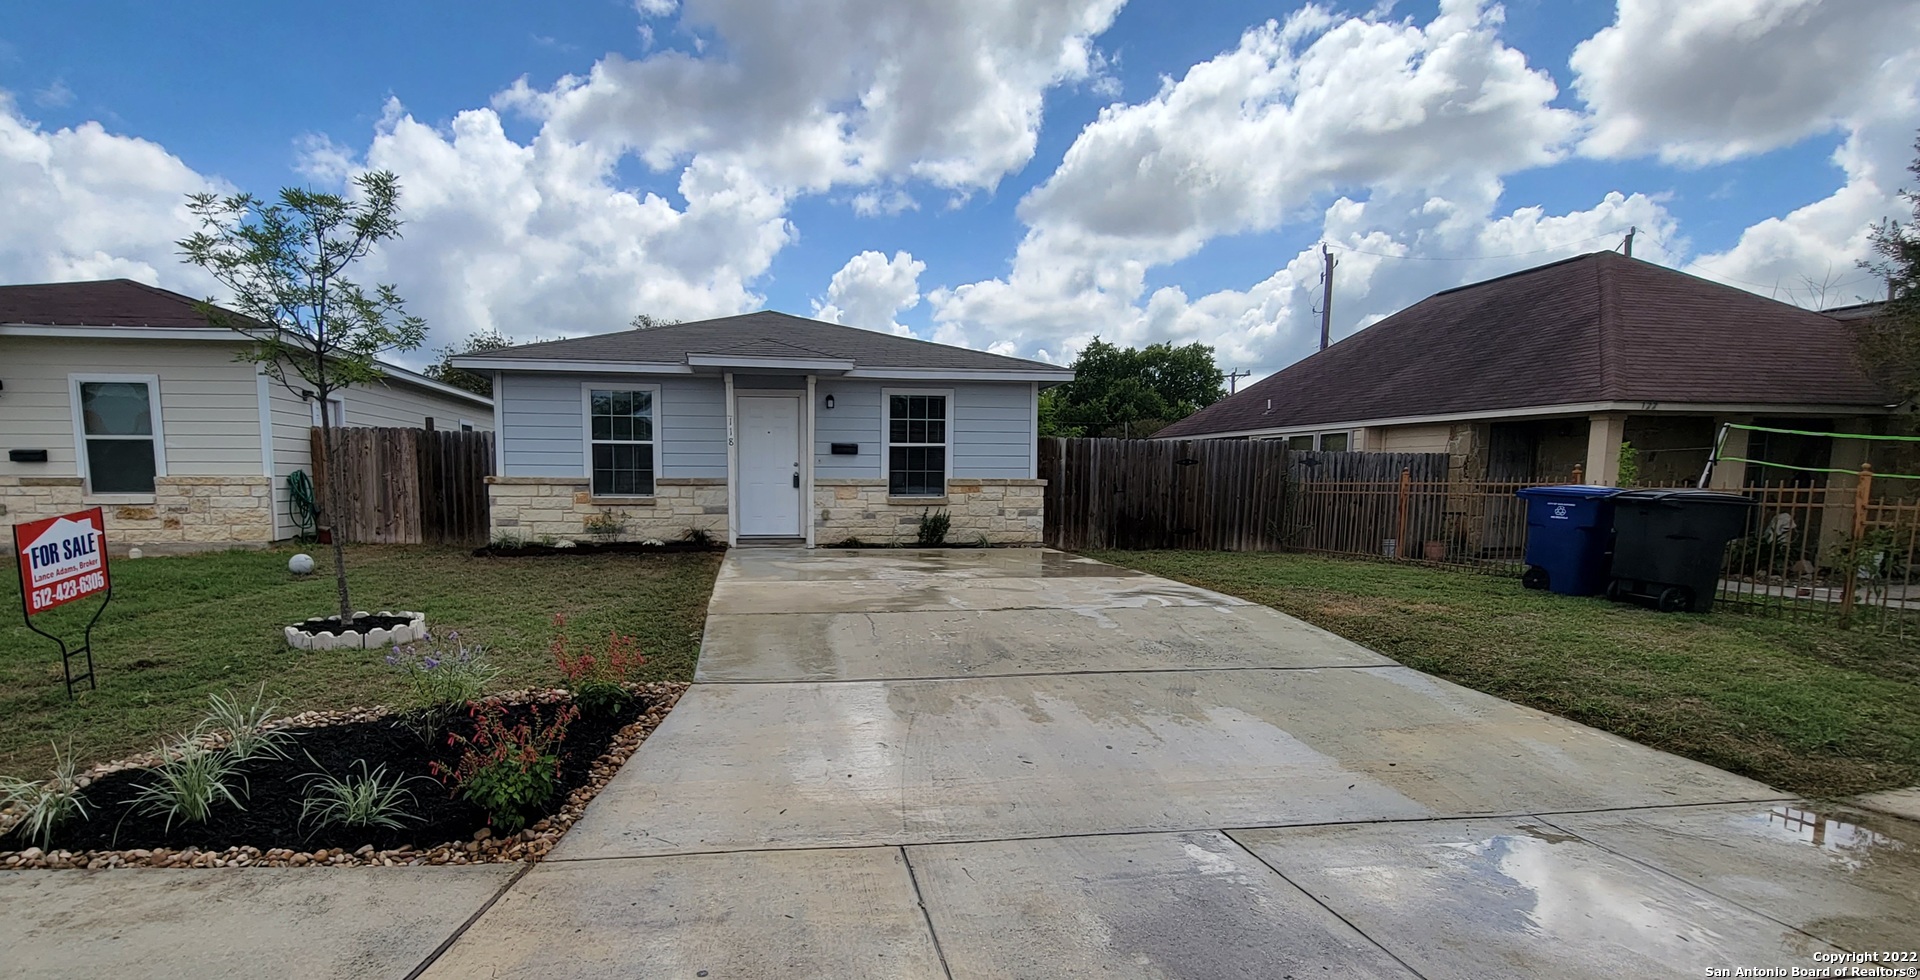 This house was built in 2017 and all of the other houses on Carranza Street are quite new which gives this small quiet cul-de-sac neighborhood a great feel as well as low future maintenance costs. It is conveniently located near Lackland Air Force Base, Alto College and downtown.